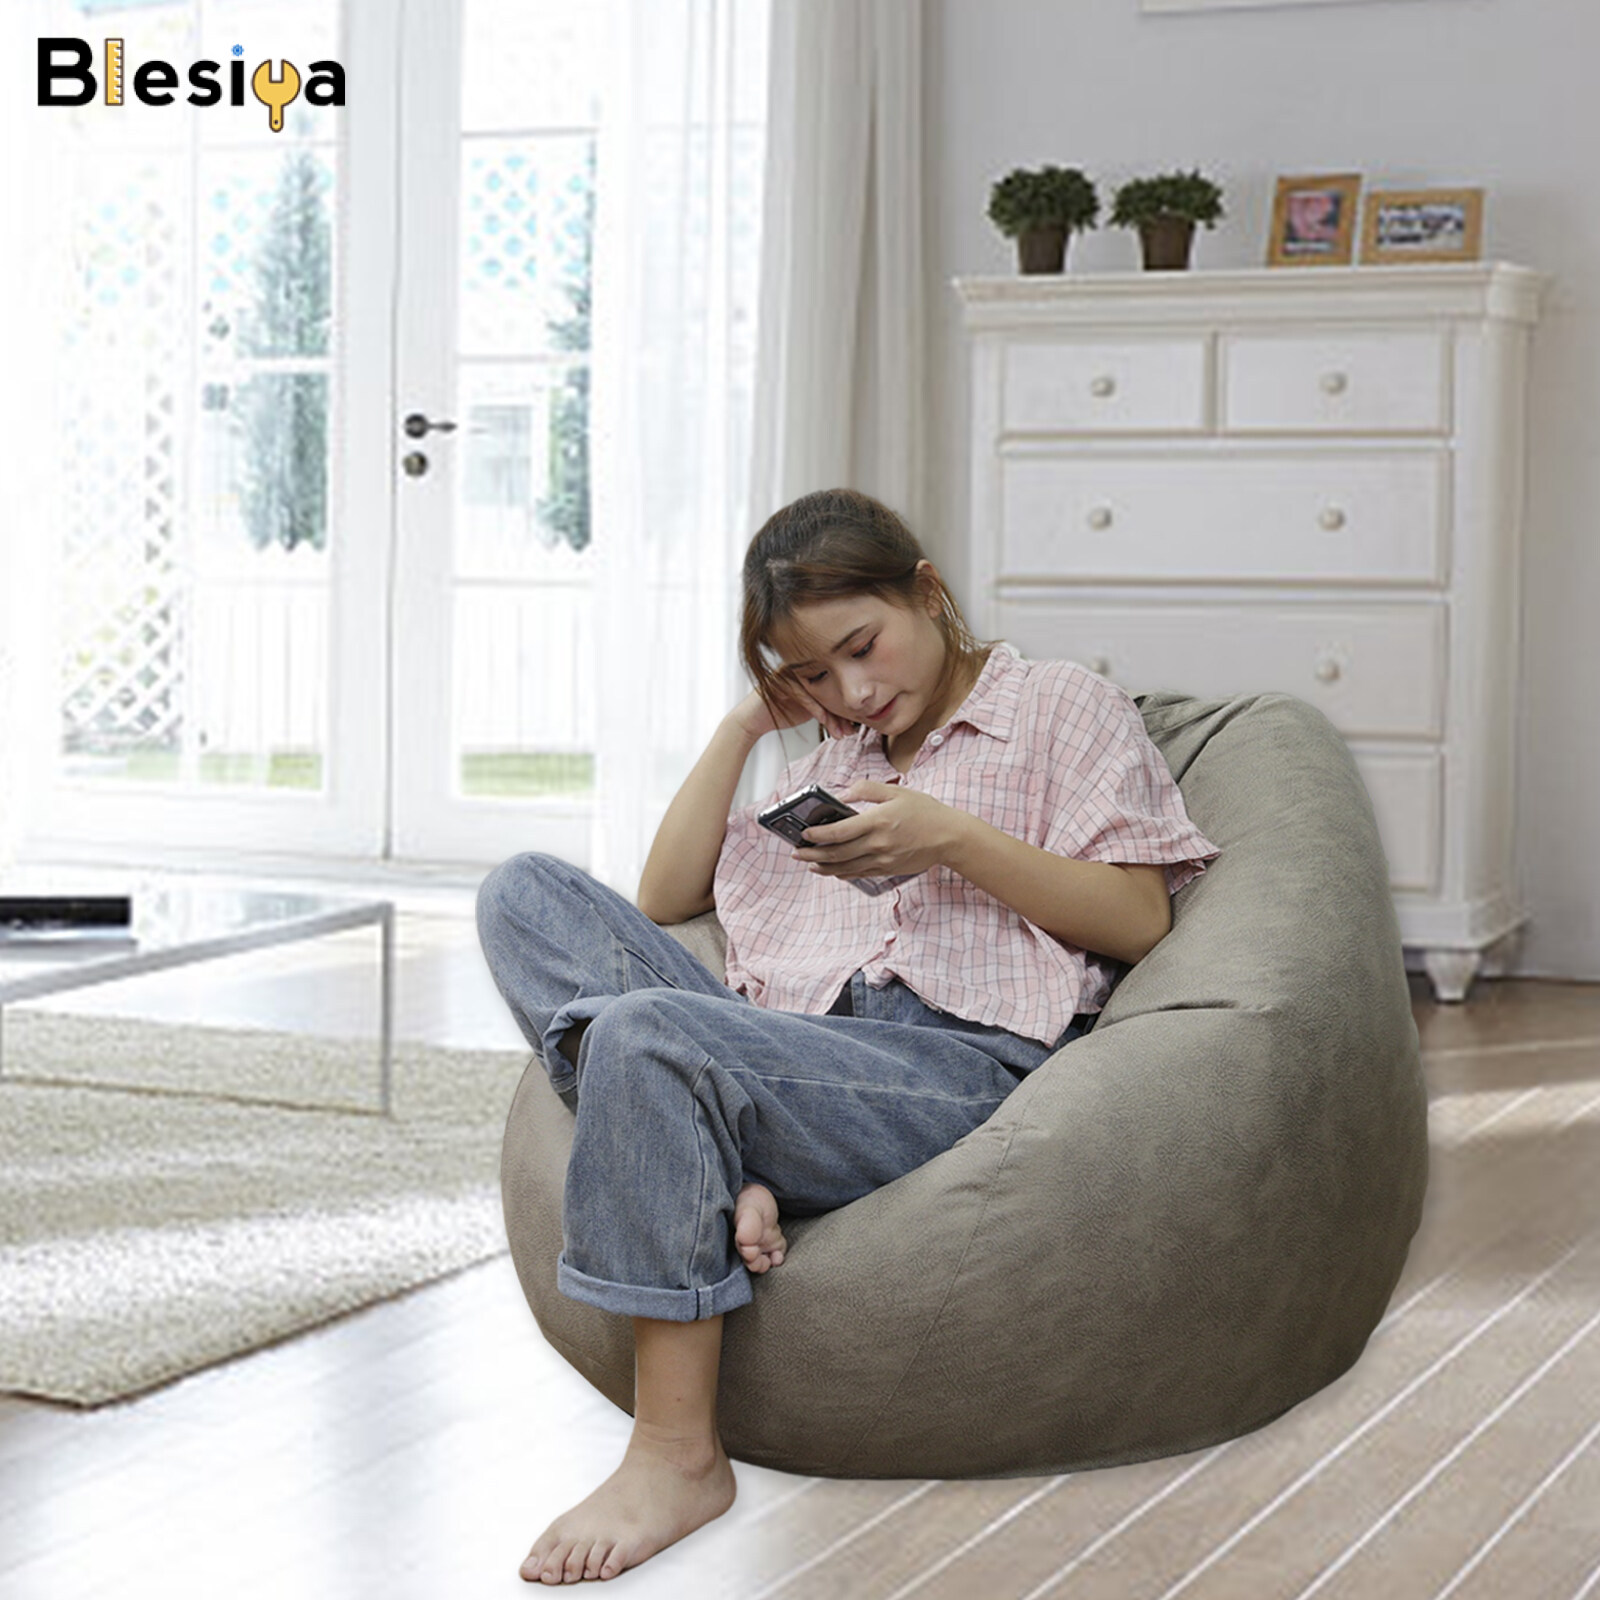 Amazon Is Selling Six-Foot, Adult-Size Cocoon Bean Bag Chairs